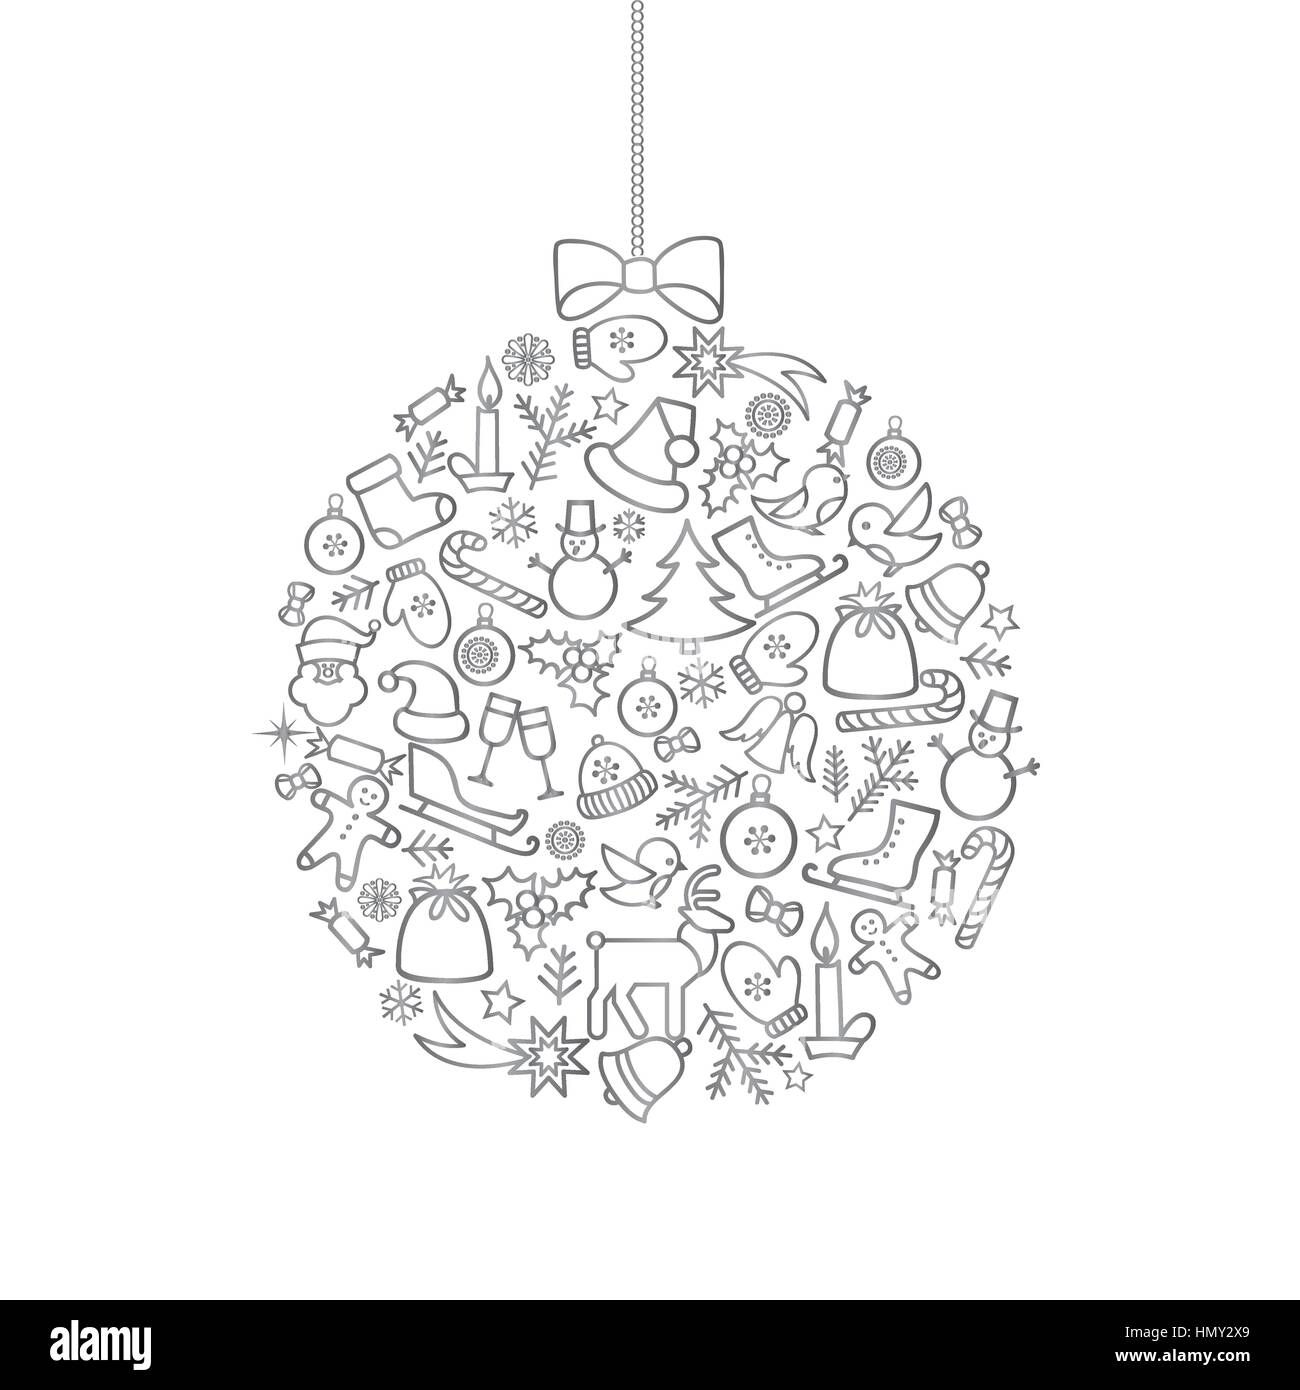 Christmas background with Ball Doodle Decor Elements Happy Winter Holiday Greeting card design with holiday